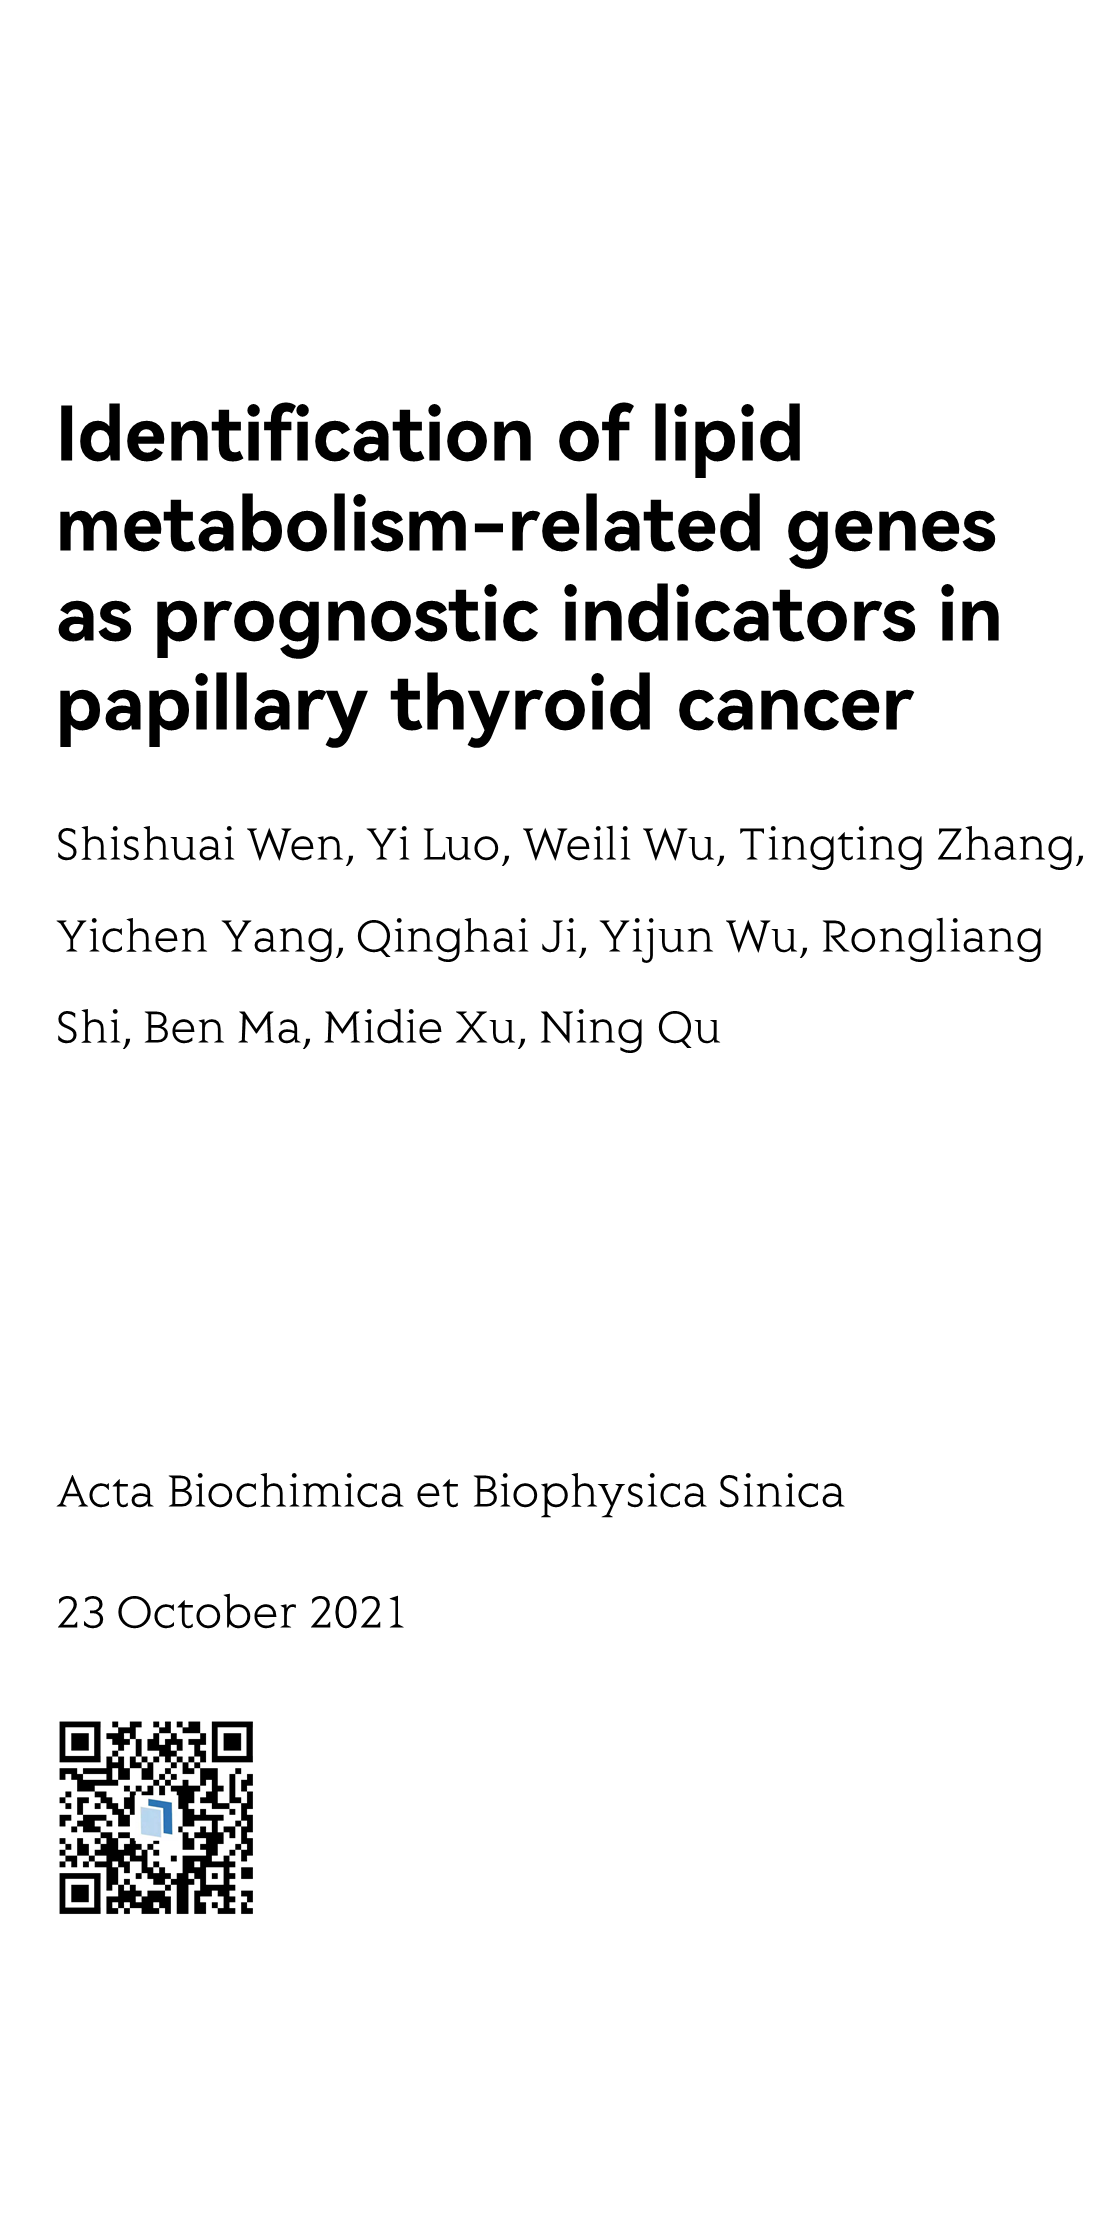 Identification of lipid metabolism-related genes as prognostic indicators in papillary thyroid cancer_1